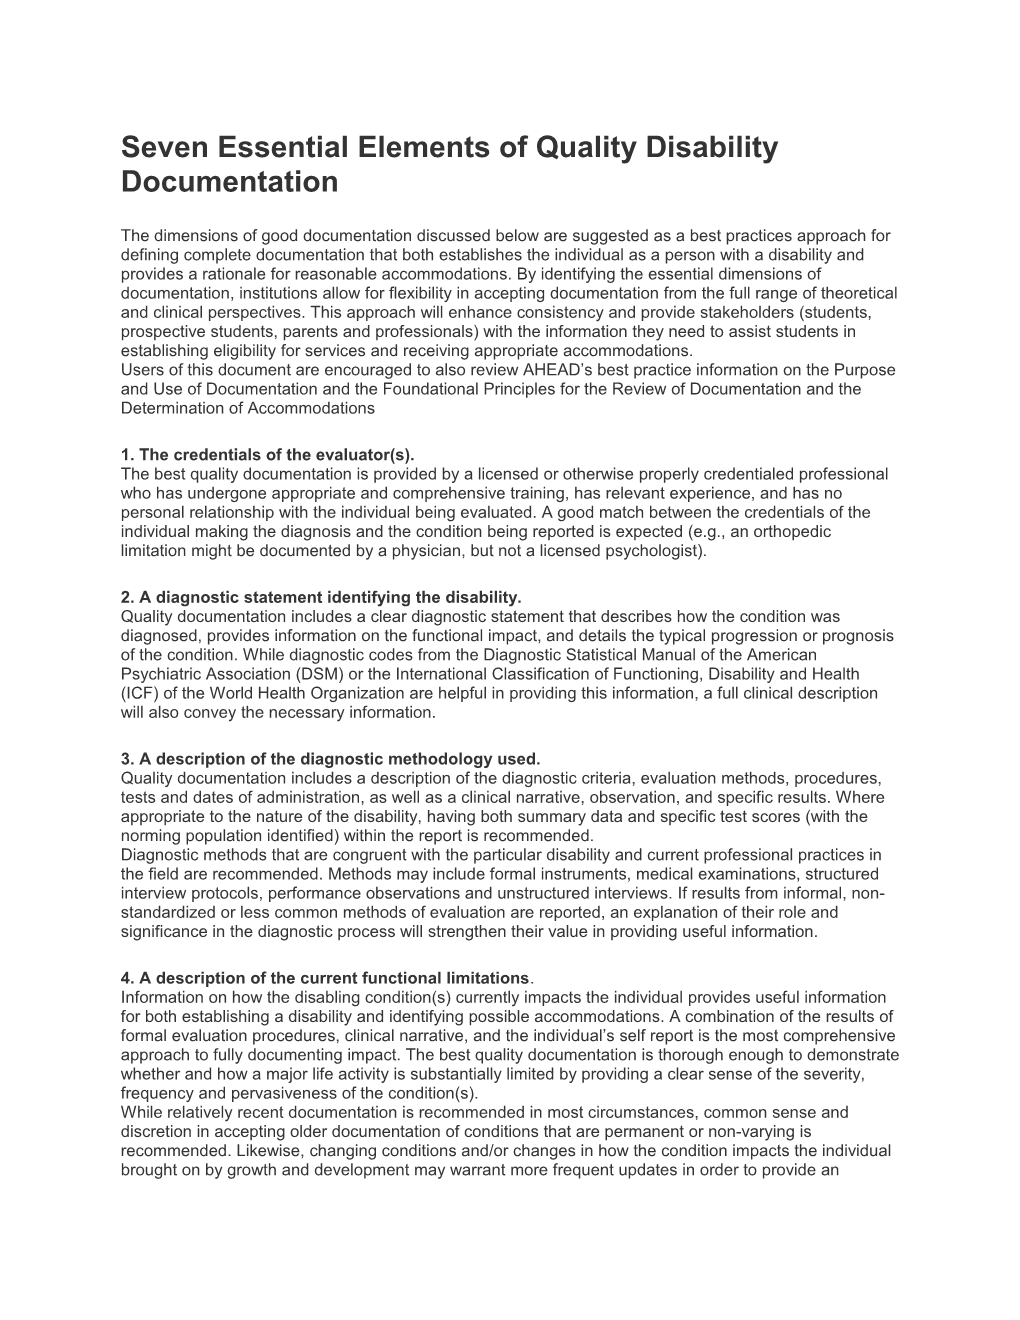 Seven Essential Elements of Quality Disability Documentation